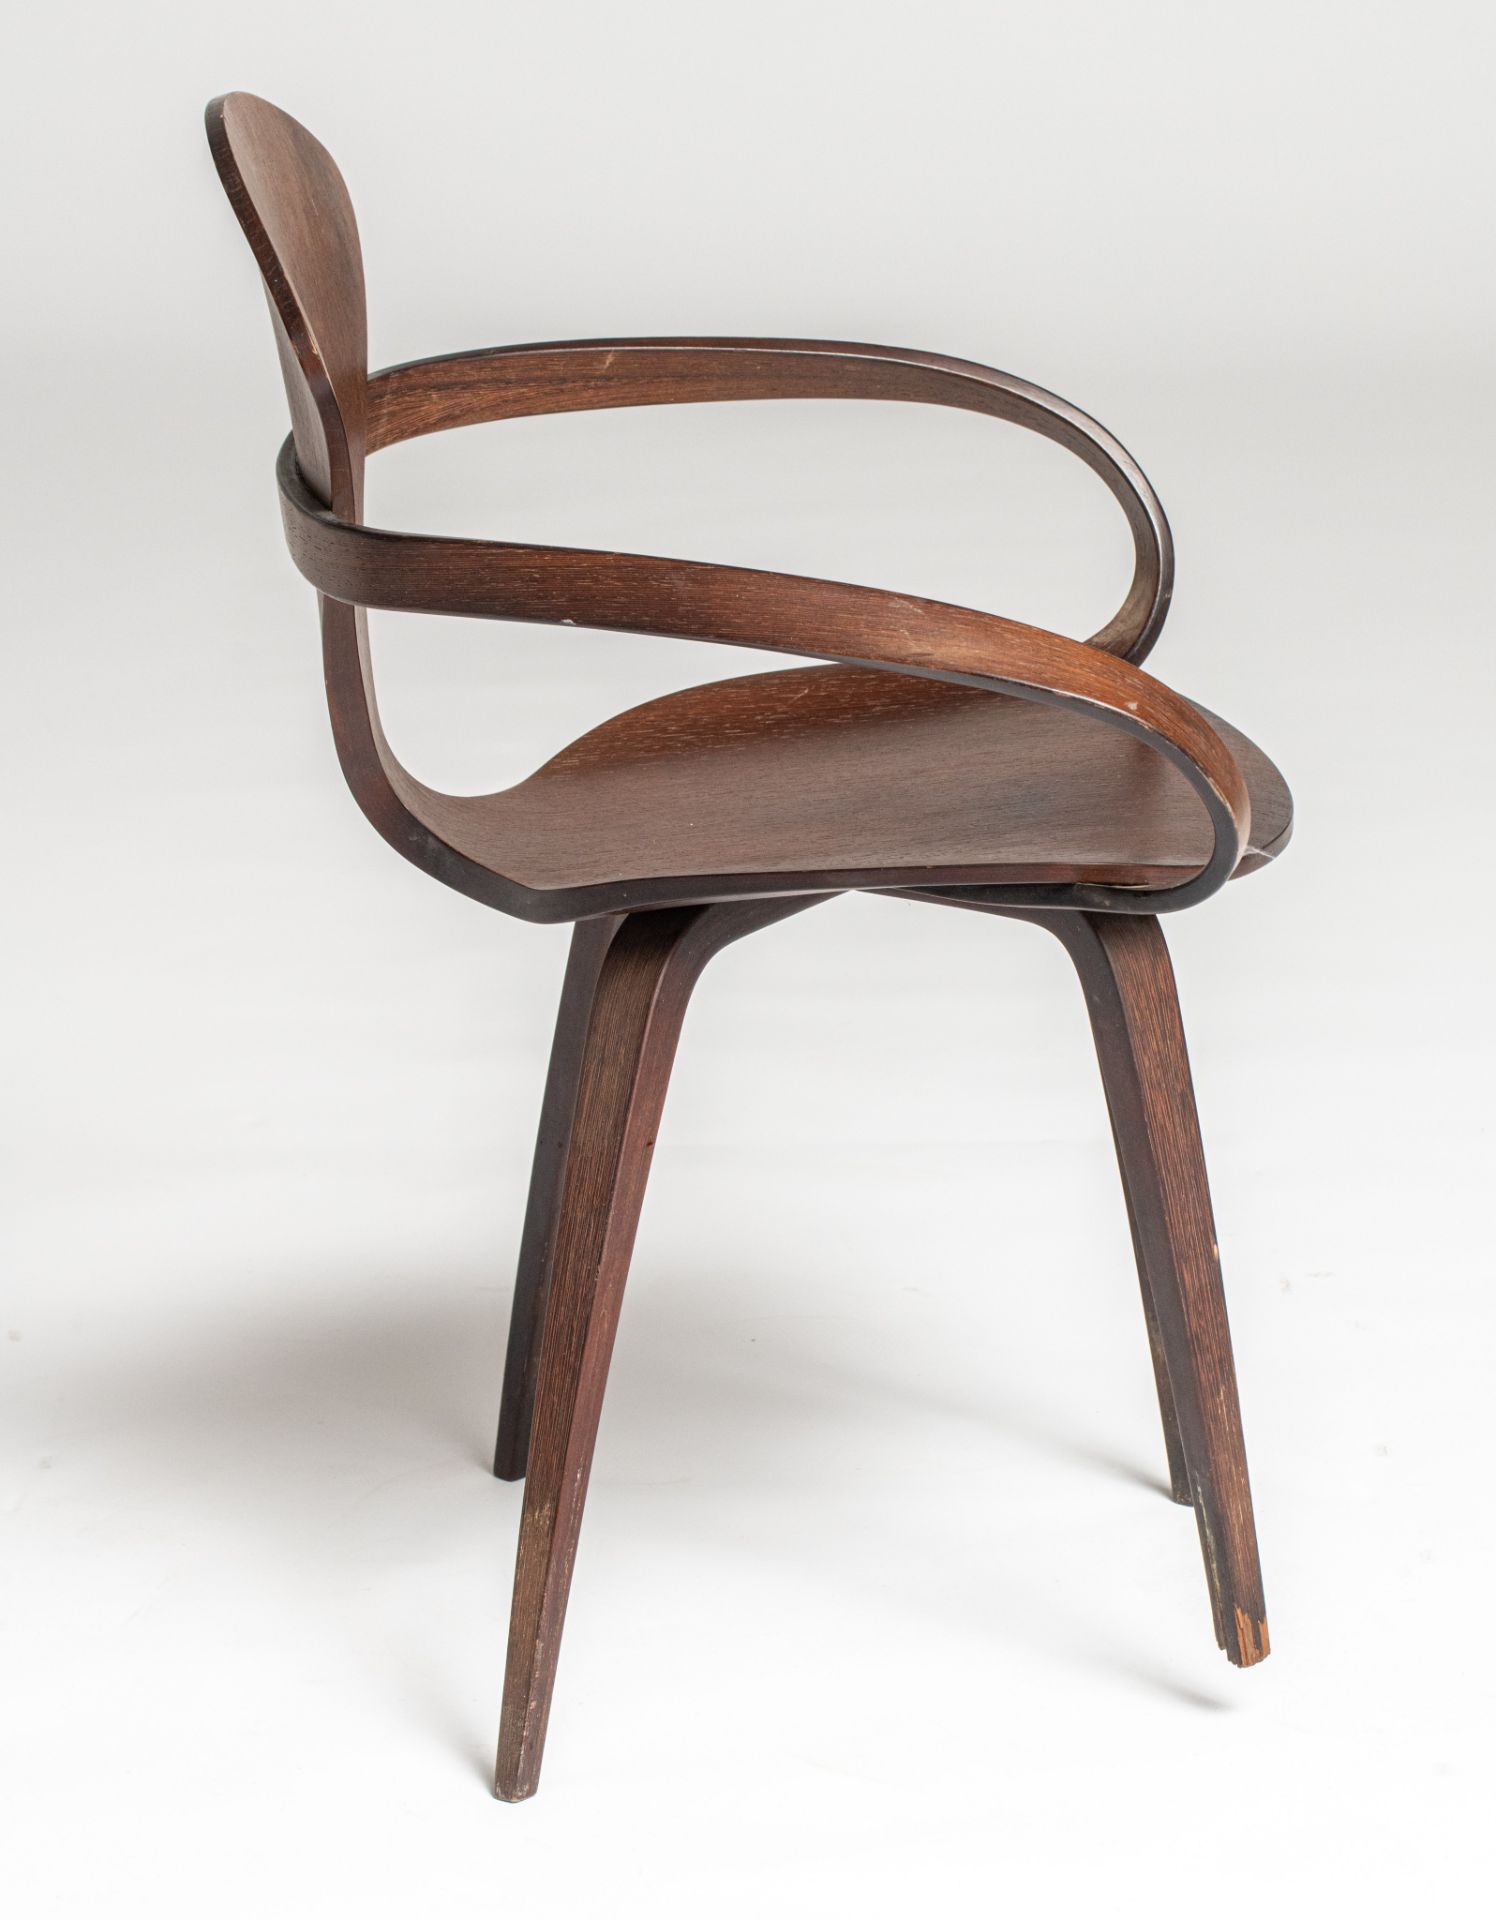 A vintage rosewood Pretzel chair by George Nelson, H 79,5 - W 67 cm - Image 7 of 13